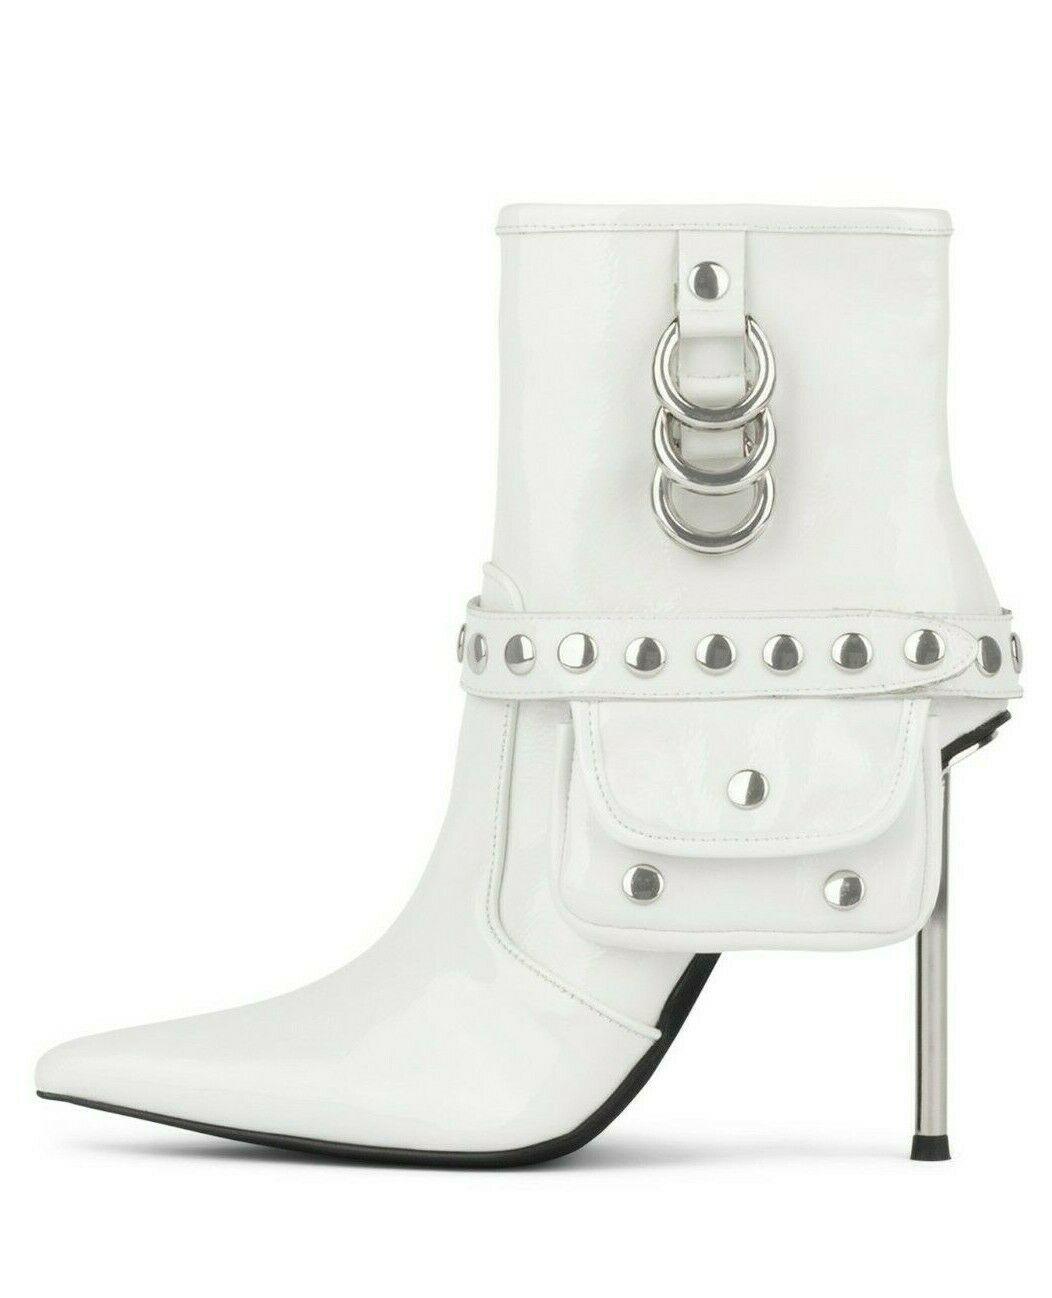 Jeffrey Campbell Stash White Crinkle Patent Leather Stiletto Ankle Boots  US 8 - SVNYFancy